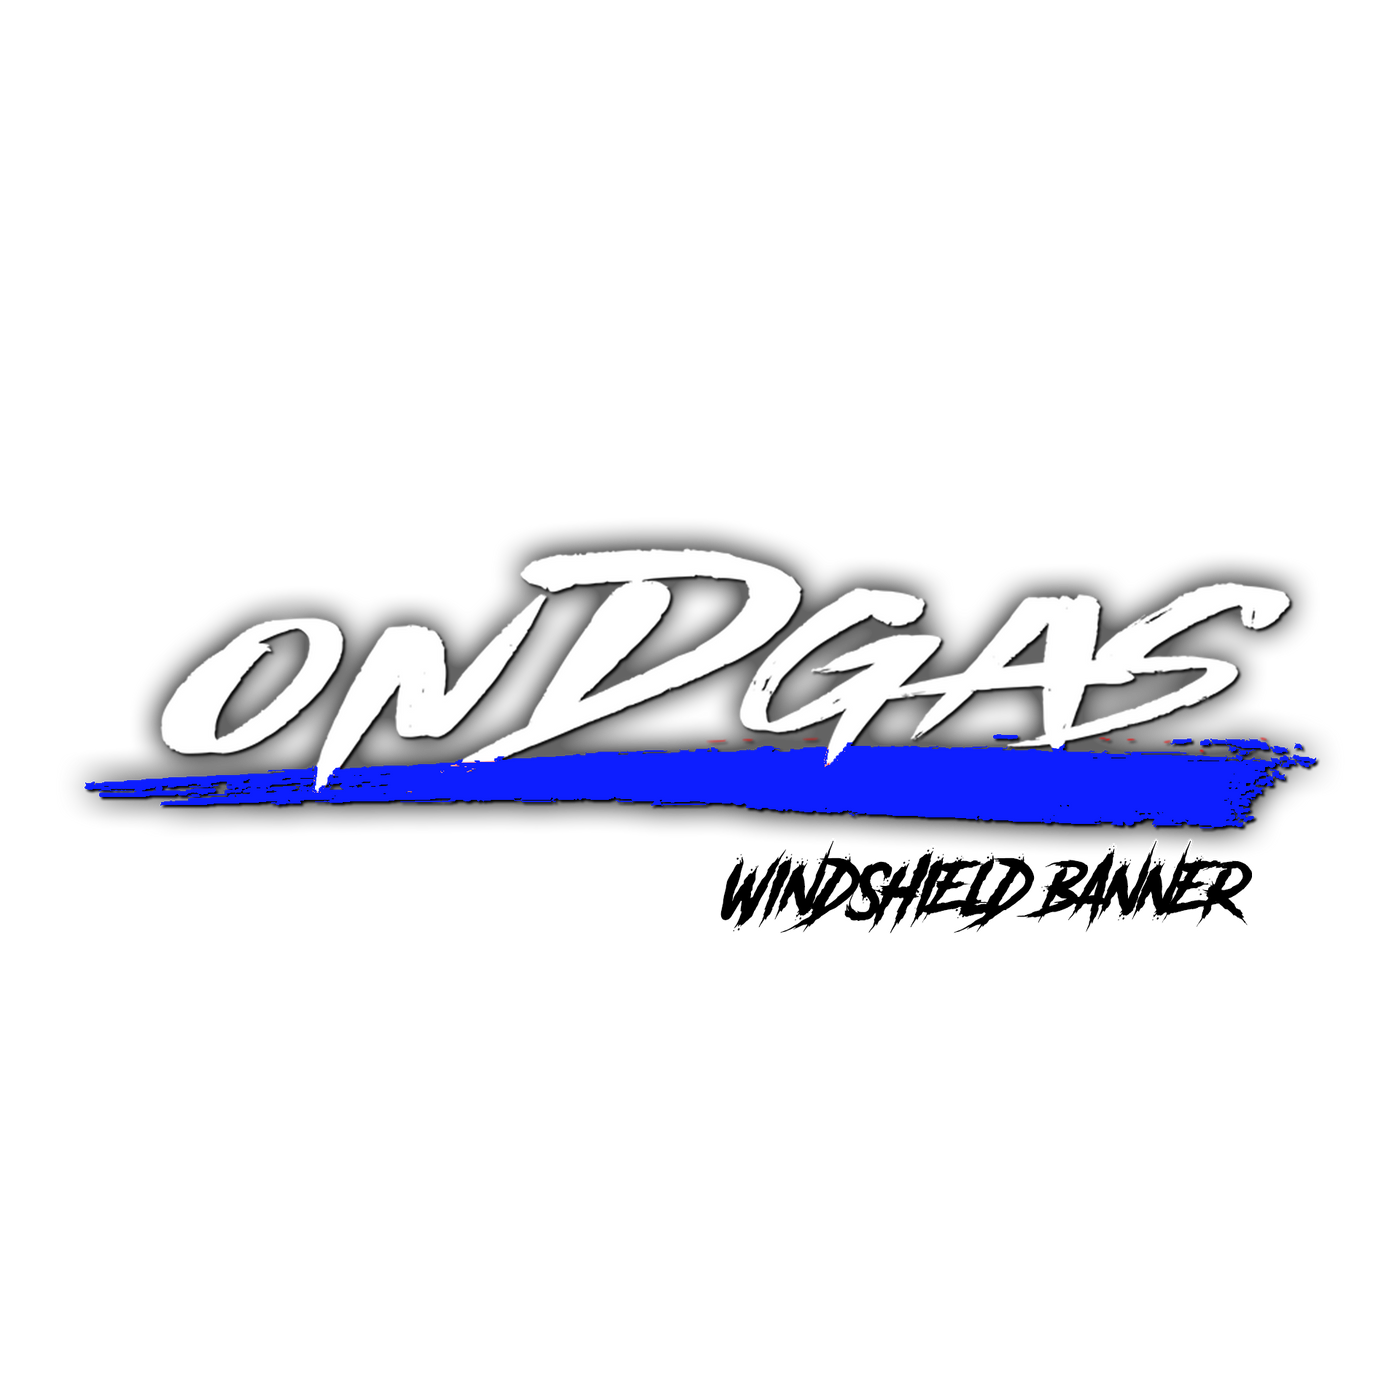 Blue and White ONDGAS WINDSHIELD decal